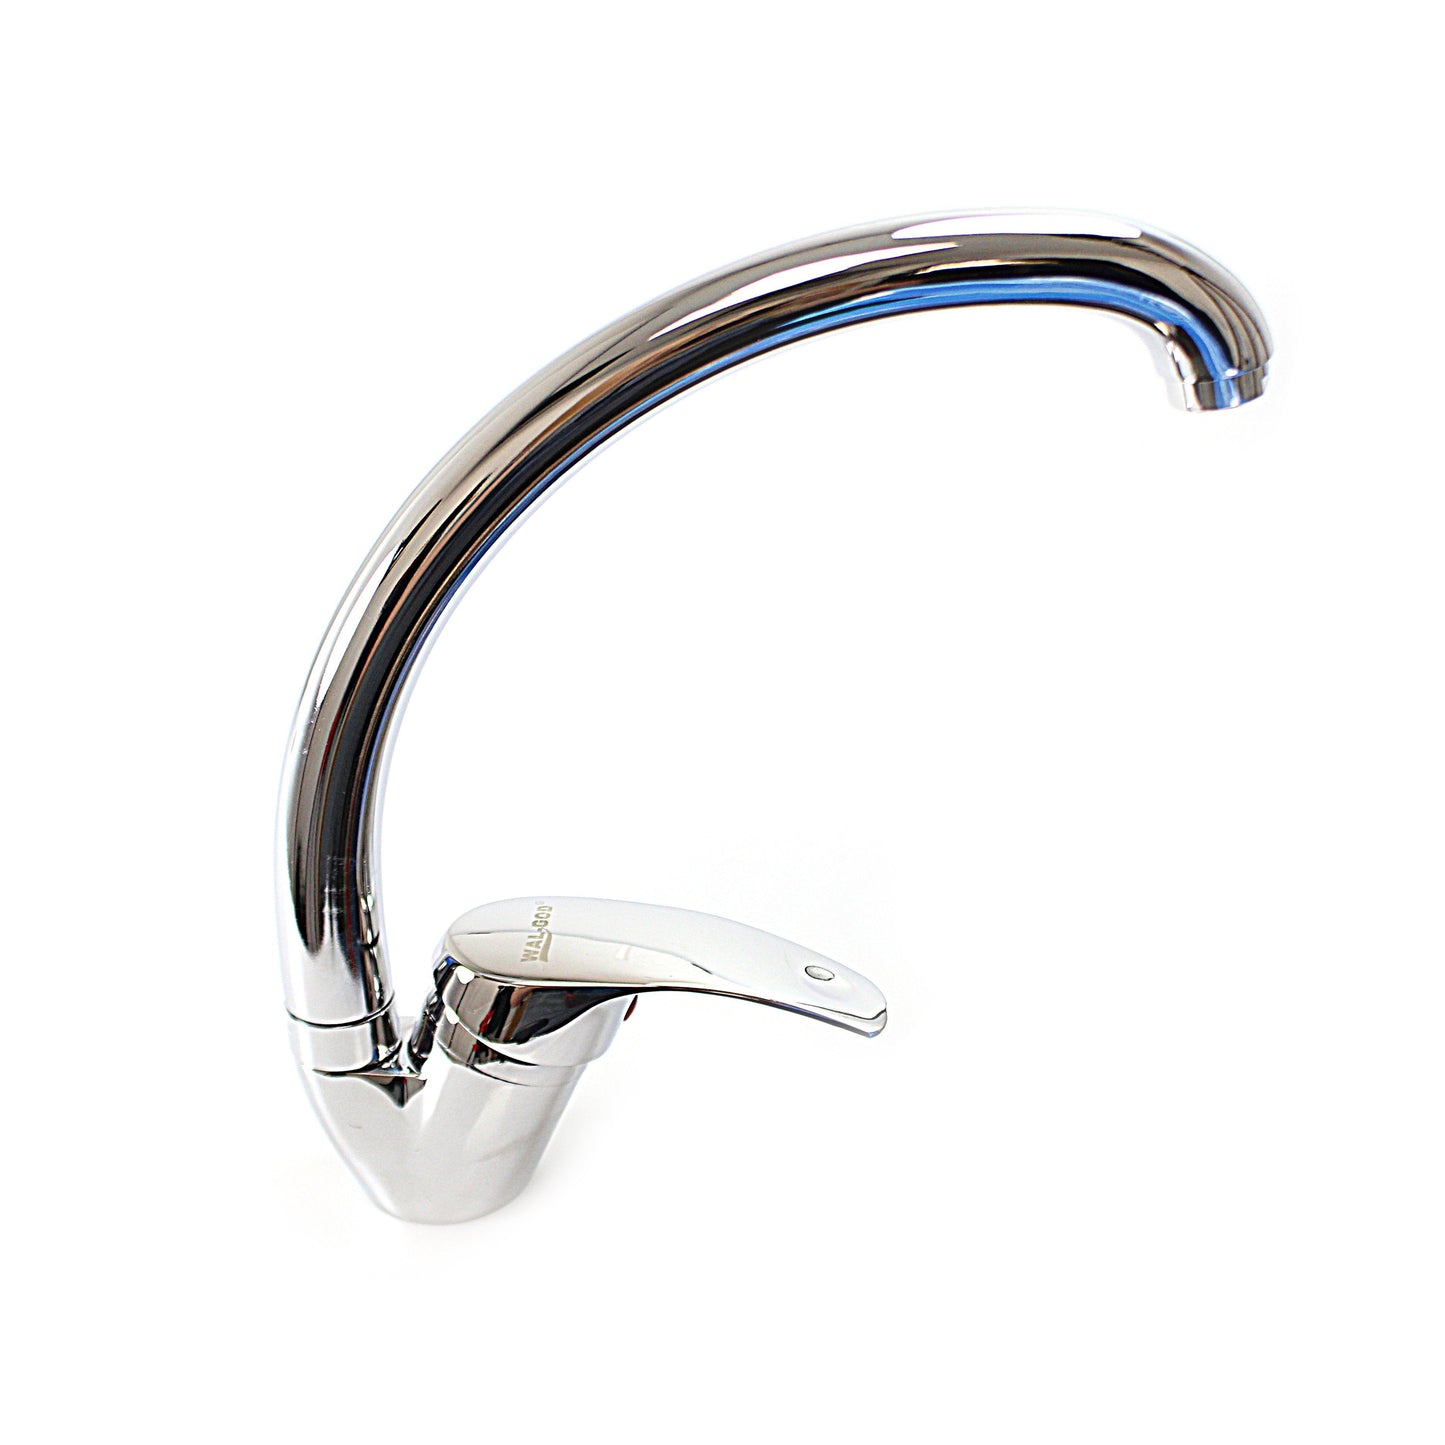 Kitchen Basin Sink Mixer Tap Spout Hot And Cold Water Chrome Tap 0847 (Parcel Rate)